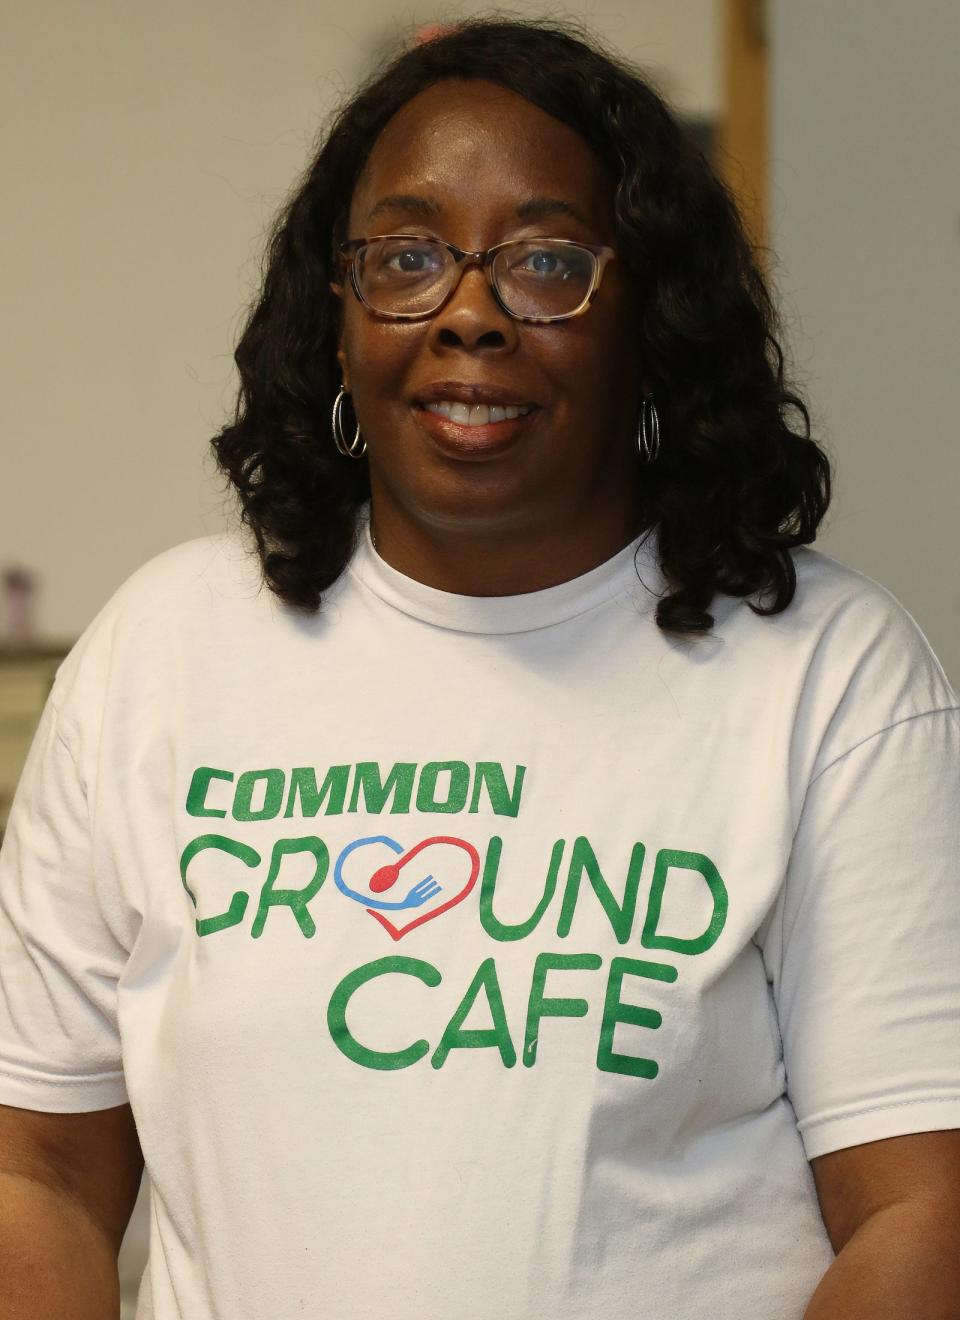 Nancy Hillman, who is a widow and stroke/cancer survivor, started Common Ground Café several years ago and provides meals for needy seniors in the county each week.